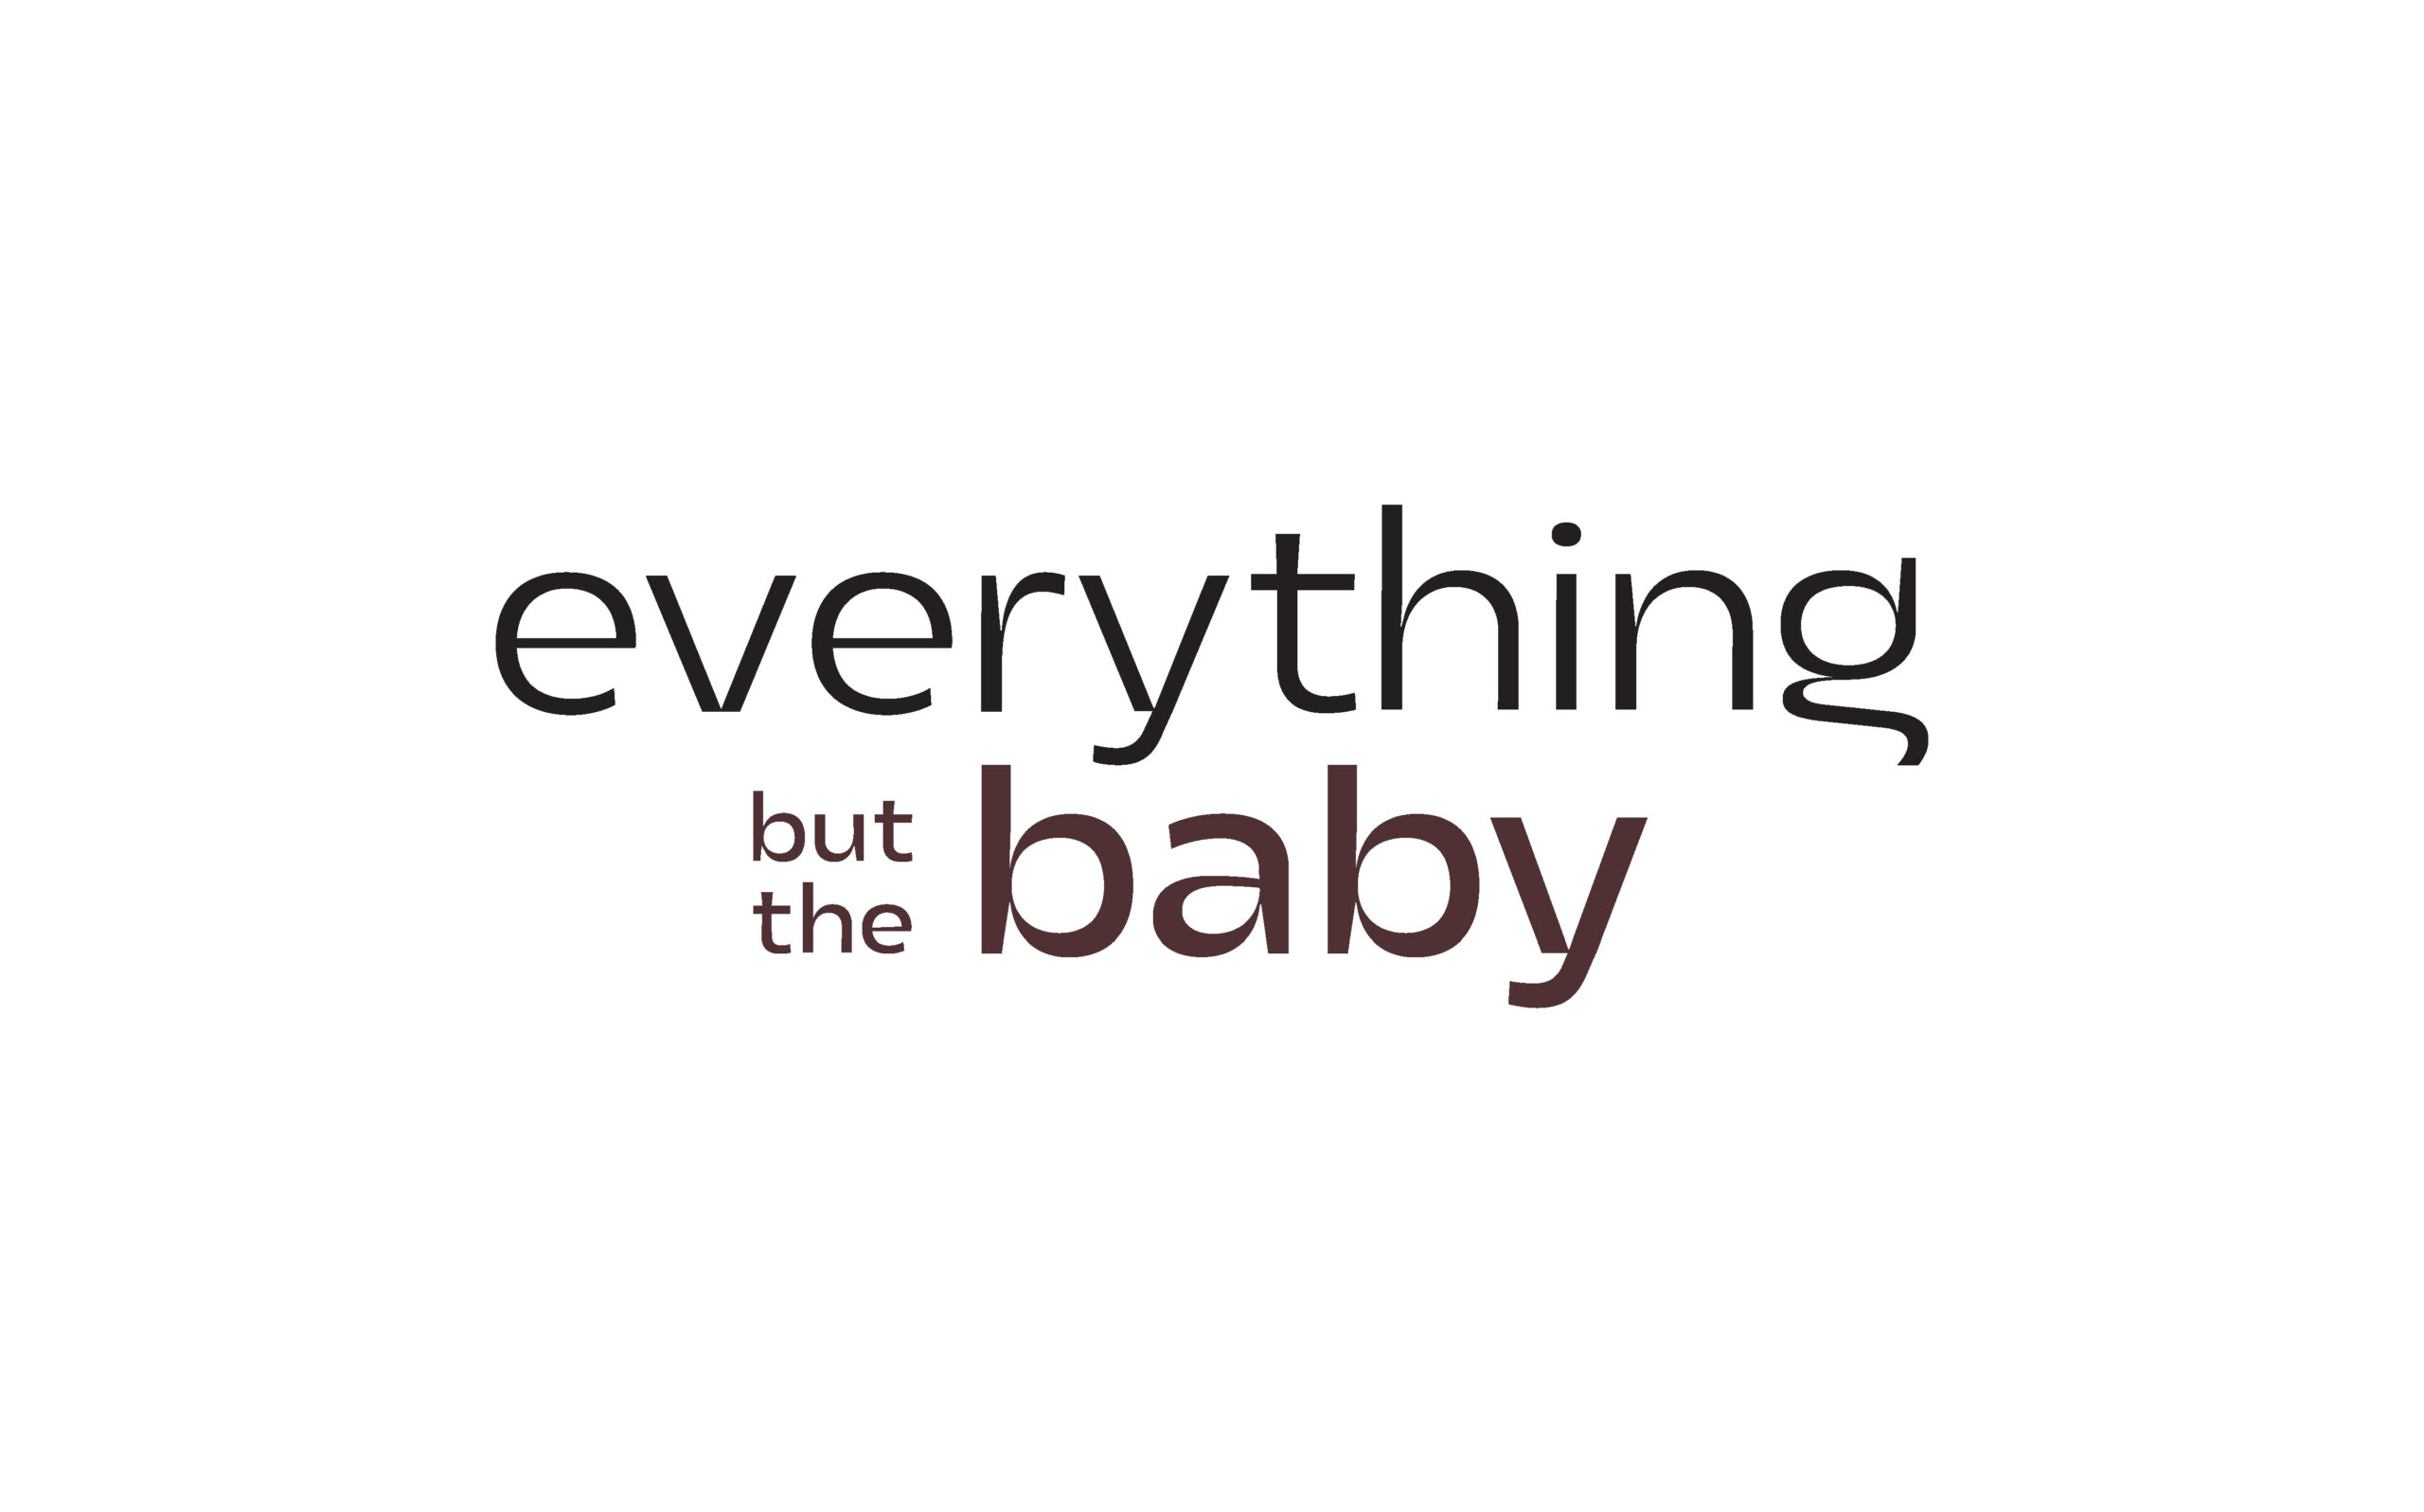 Everything but the baby